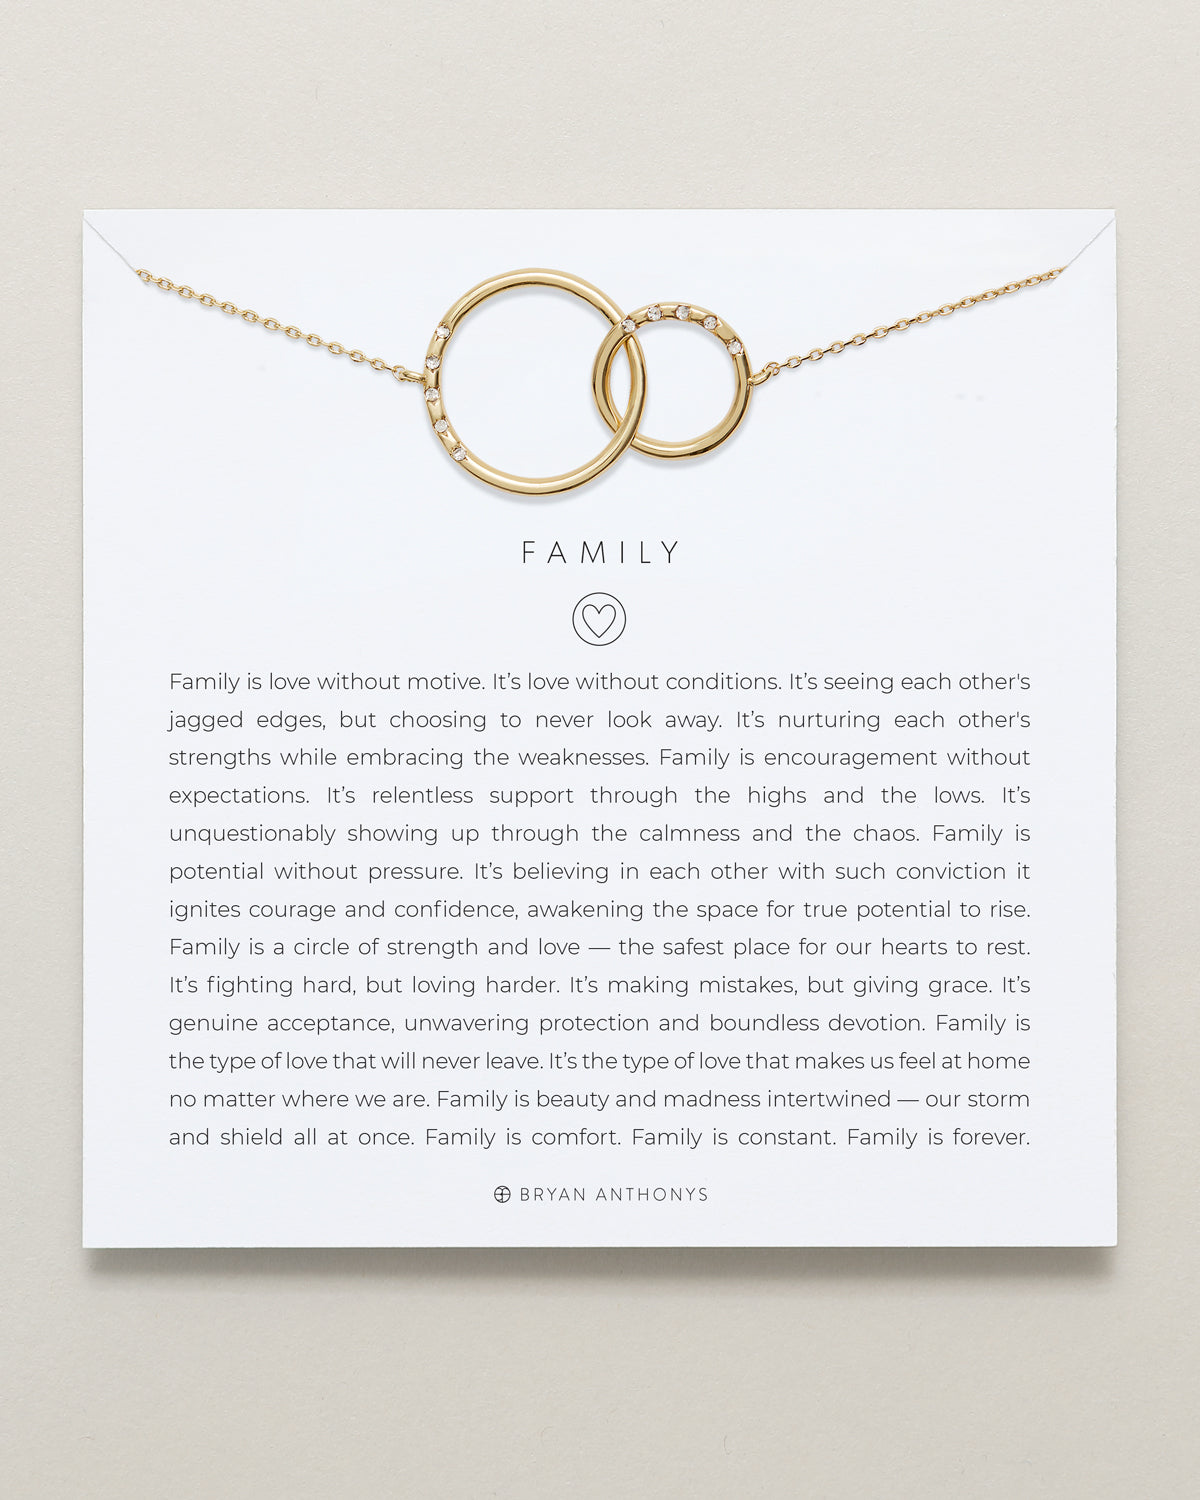 Bryan Anthonys Family Necklace Interlocking Circles in Gold on Card